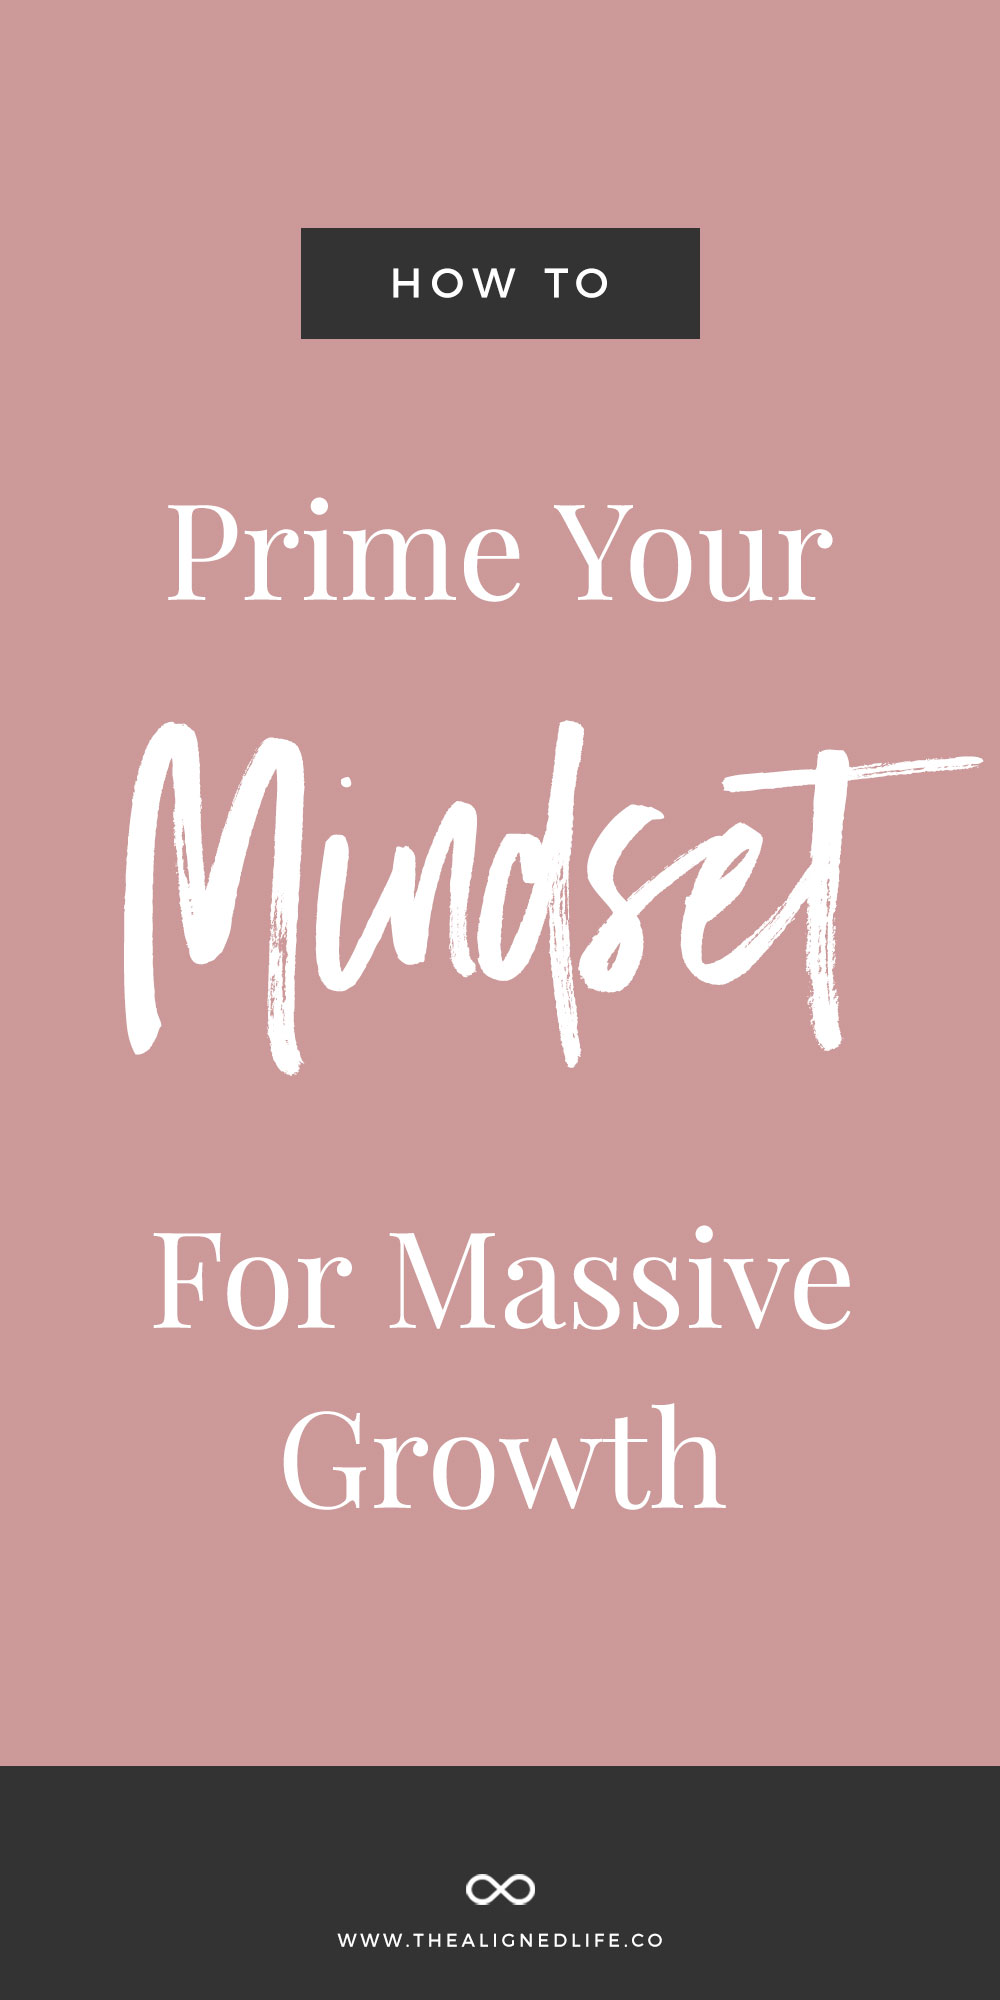 How To Prime Your Mindset For Massive Growth